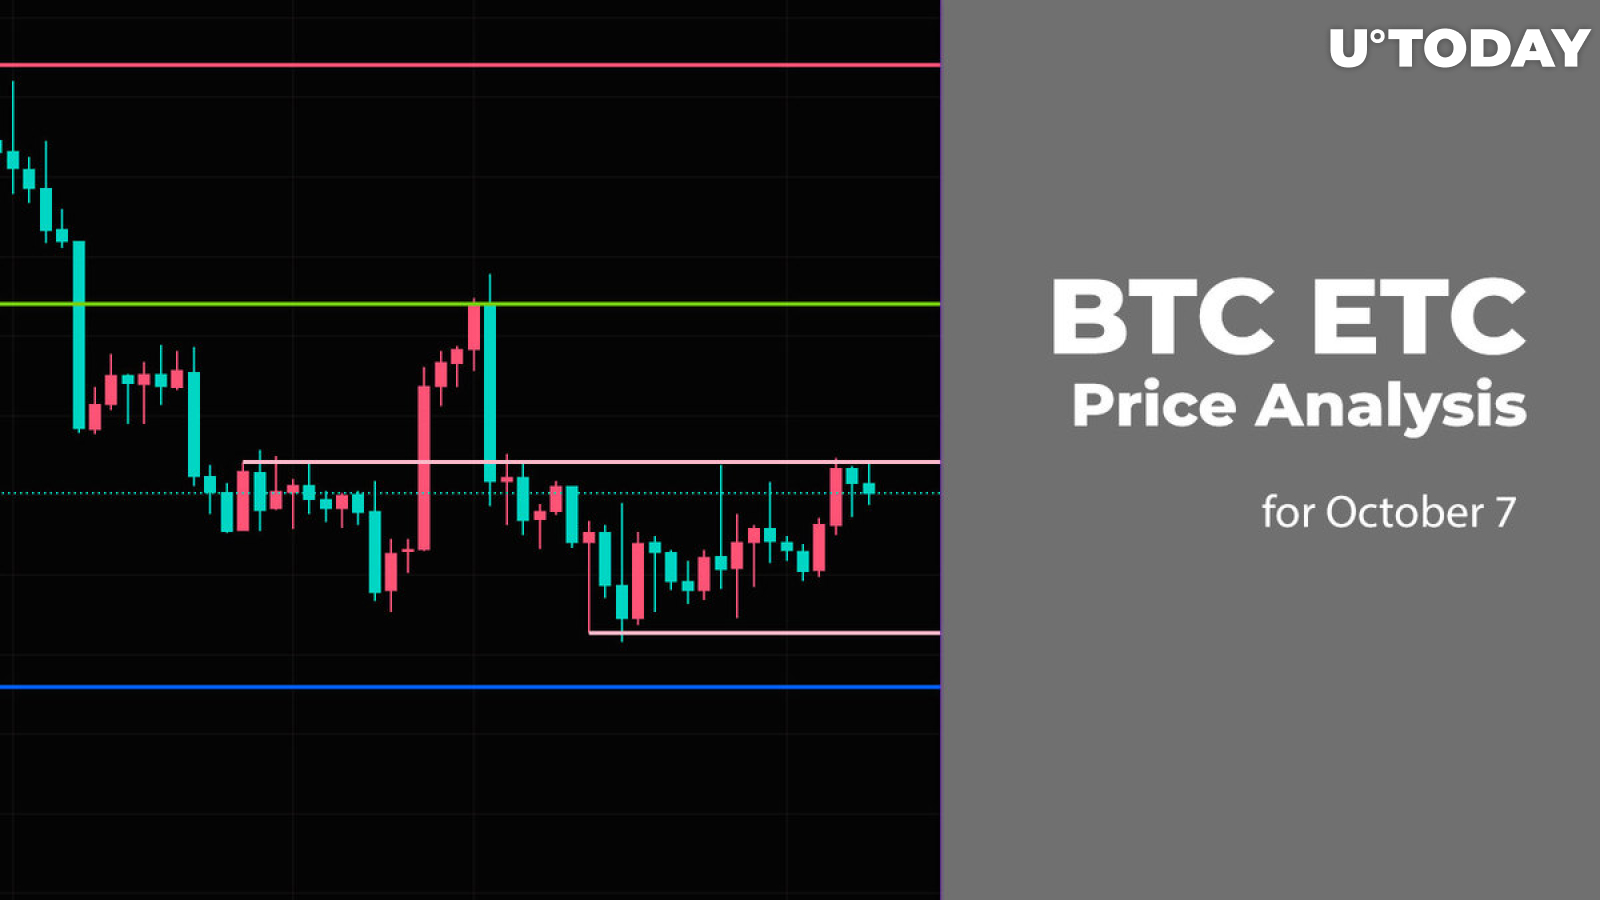 BTC and ETC Price Analysis for October 7